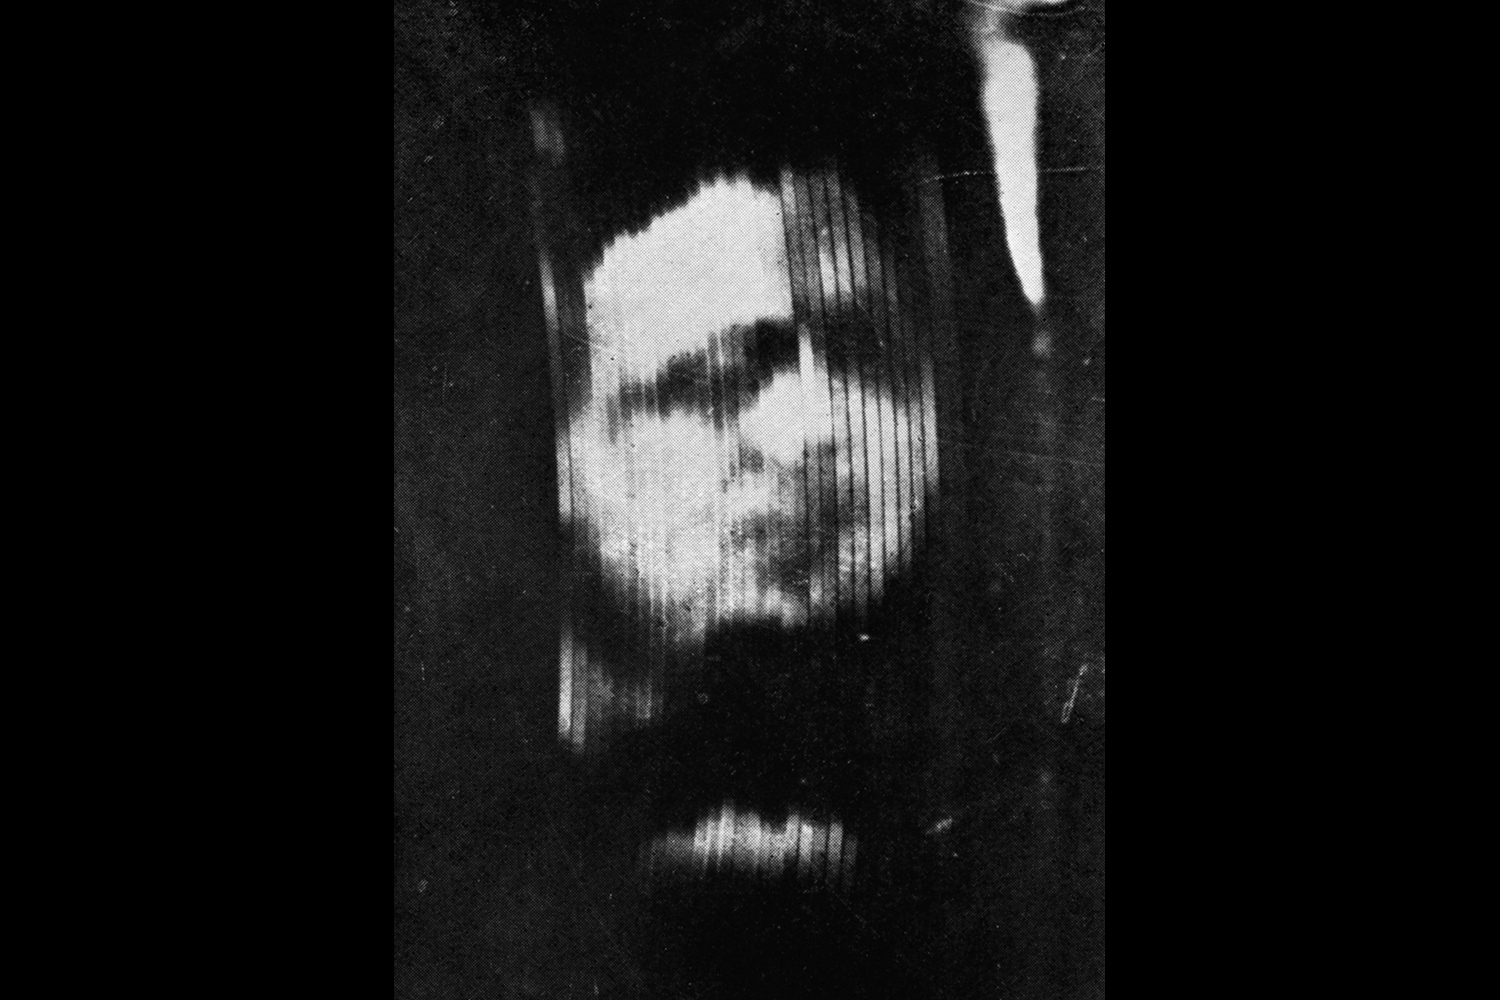 An image from John Logie Baird's first television demonstration in 1926.